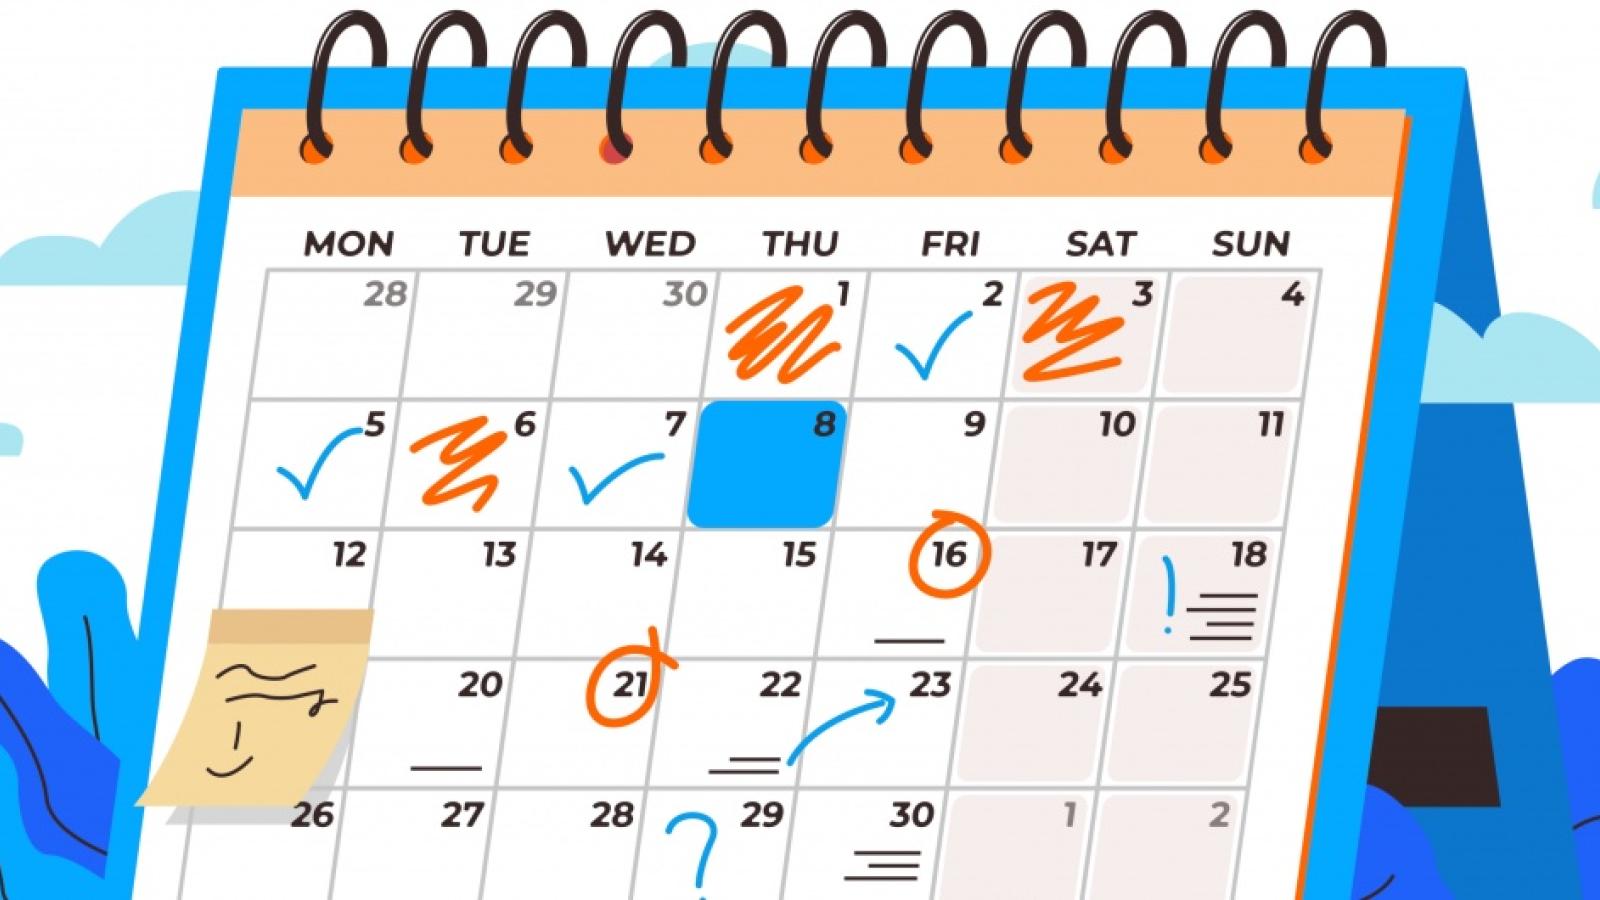 Calendar of Schedule - Schedule an Appointment with GBCS